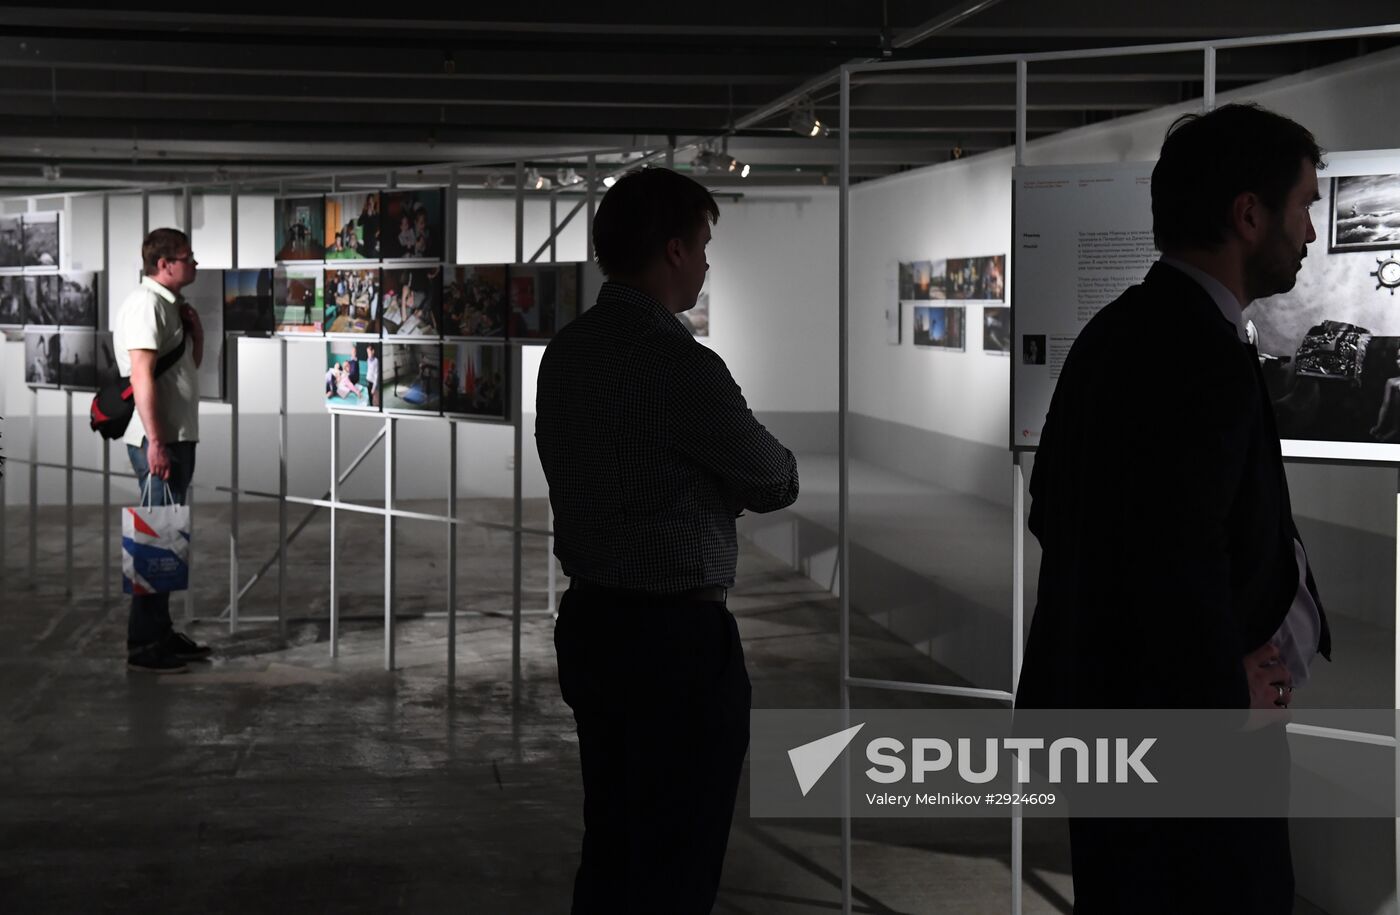 Exhibition of photos by Andrei Stenin International Press Photo Contest winners opens in Moscow